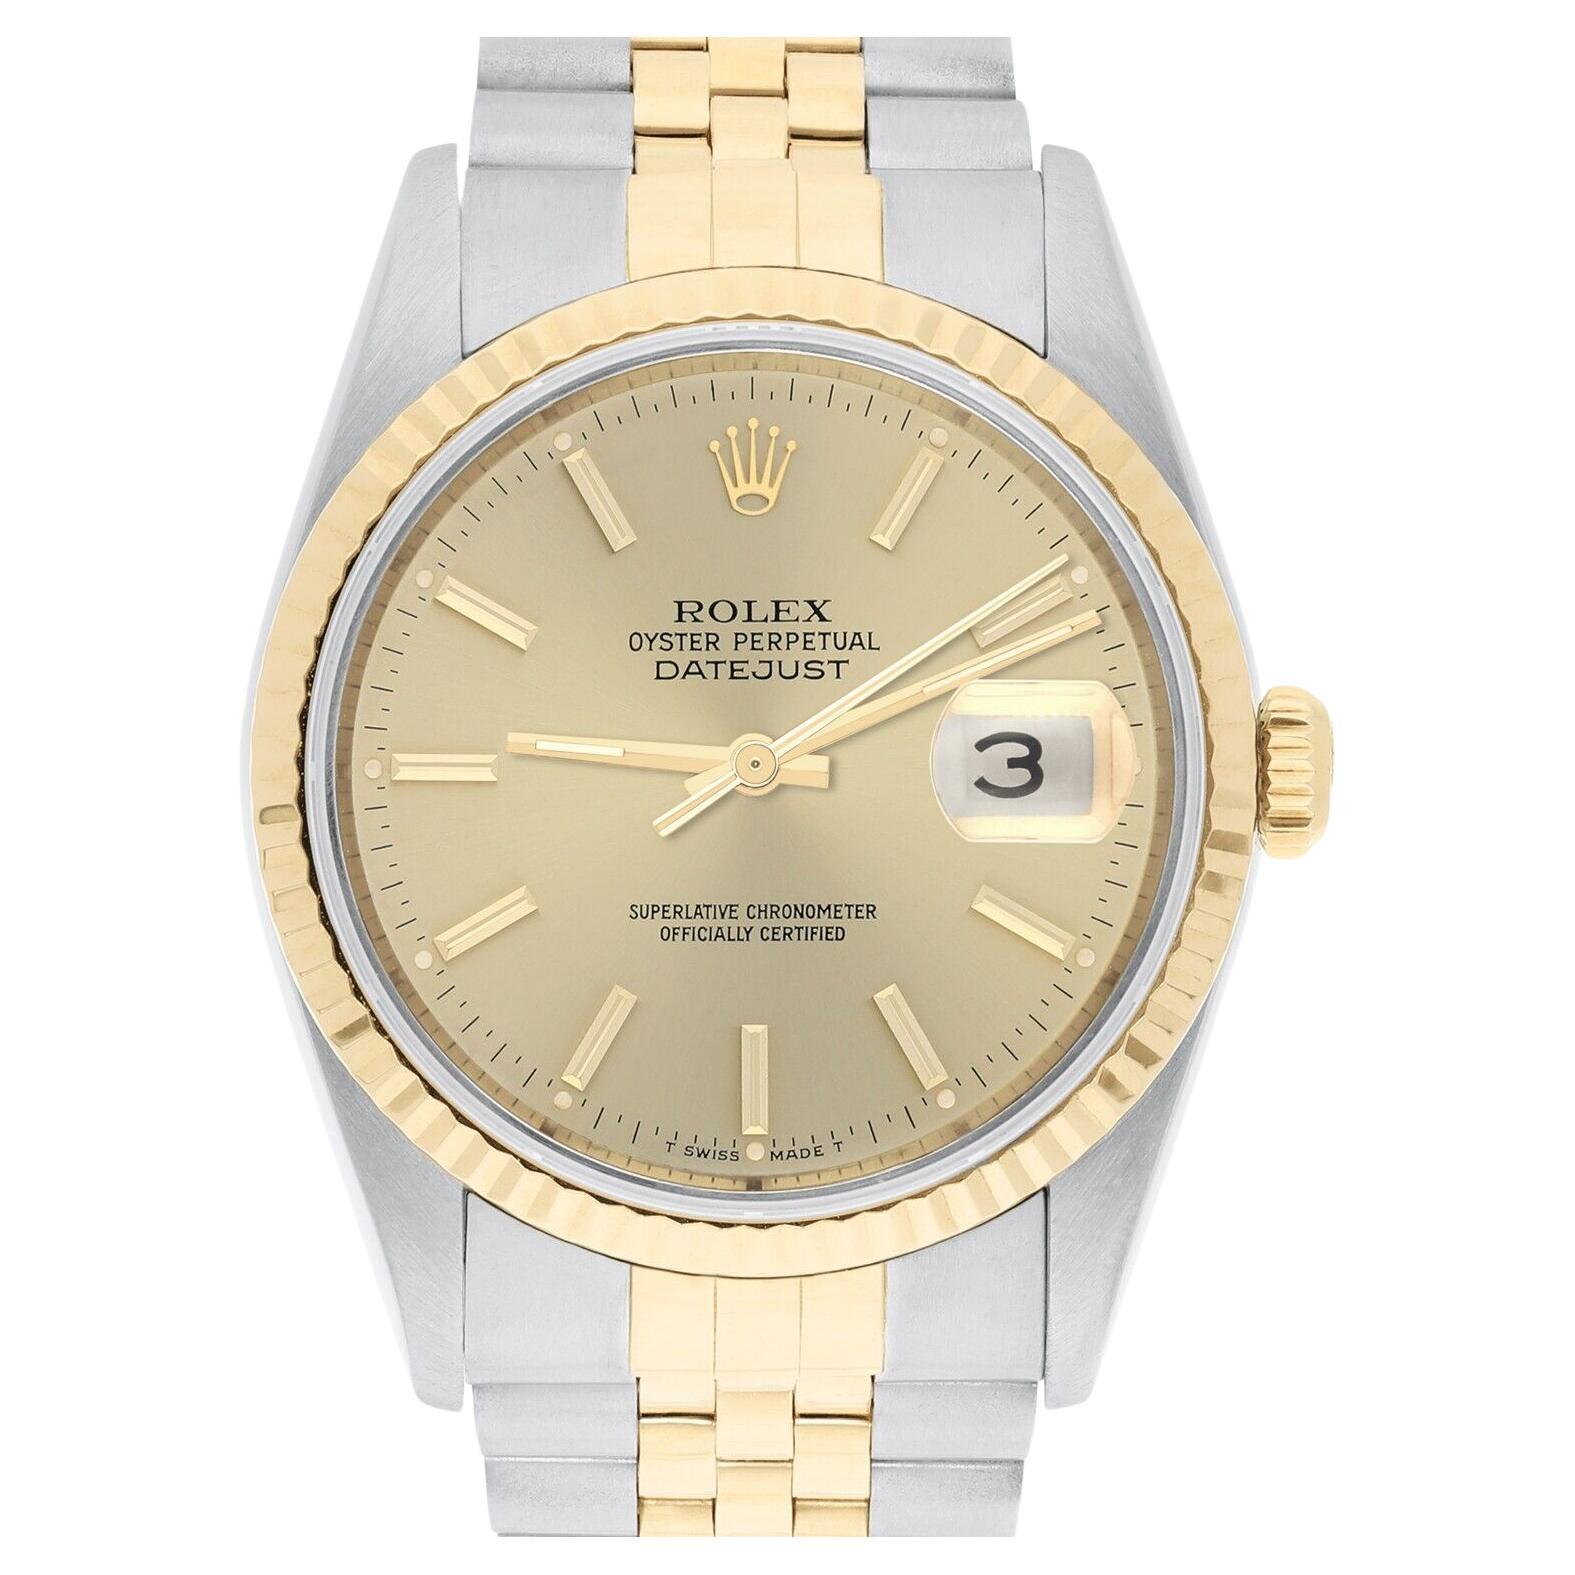 Rolex Datejust 36mm Two Tone Champagne Index Dial Jubilee 16233 Circa 2000